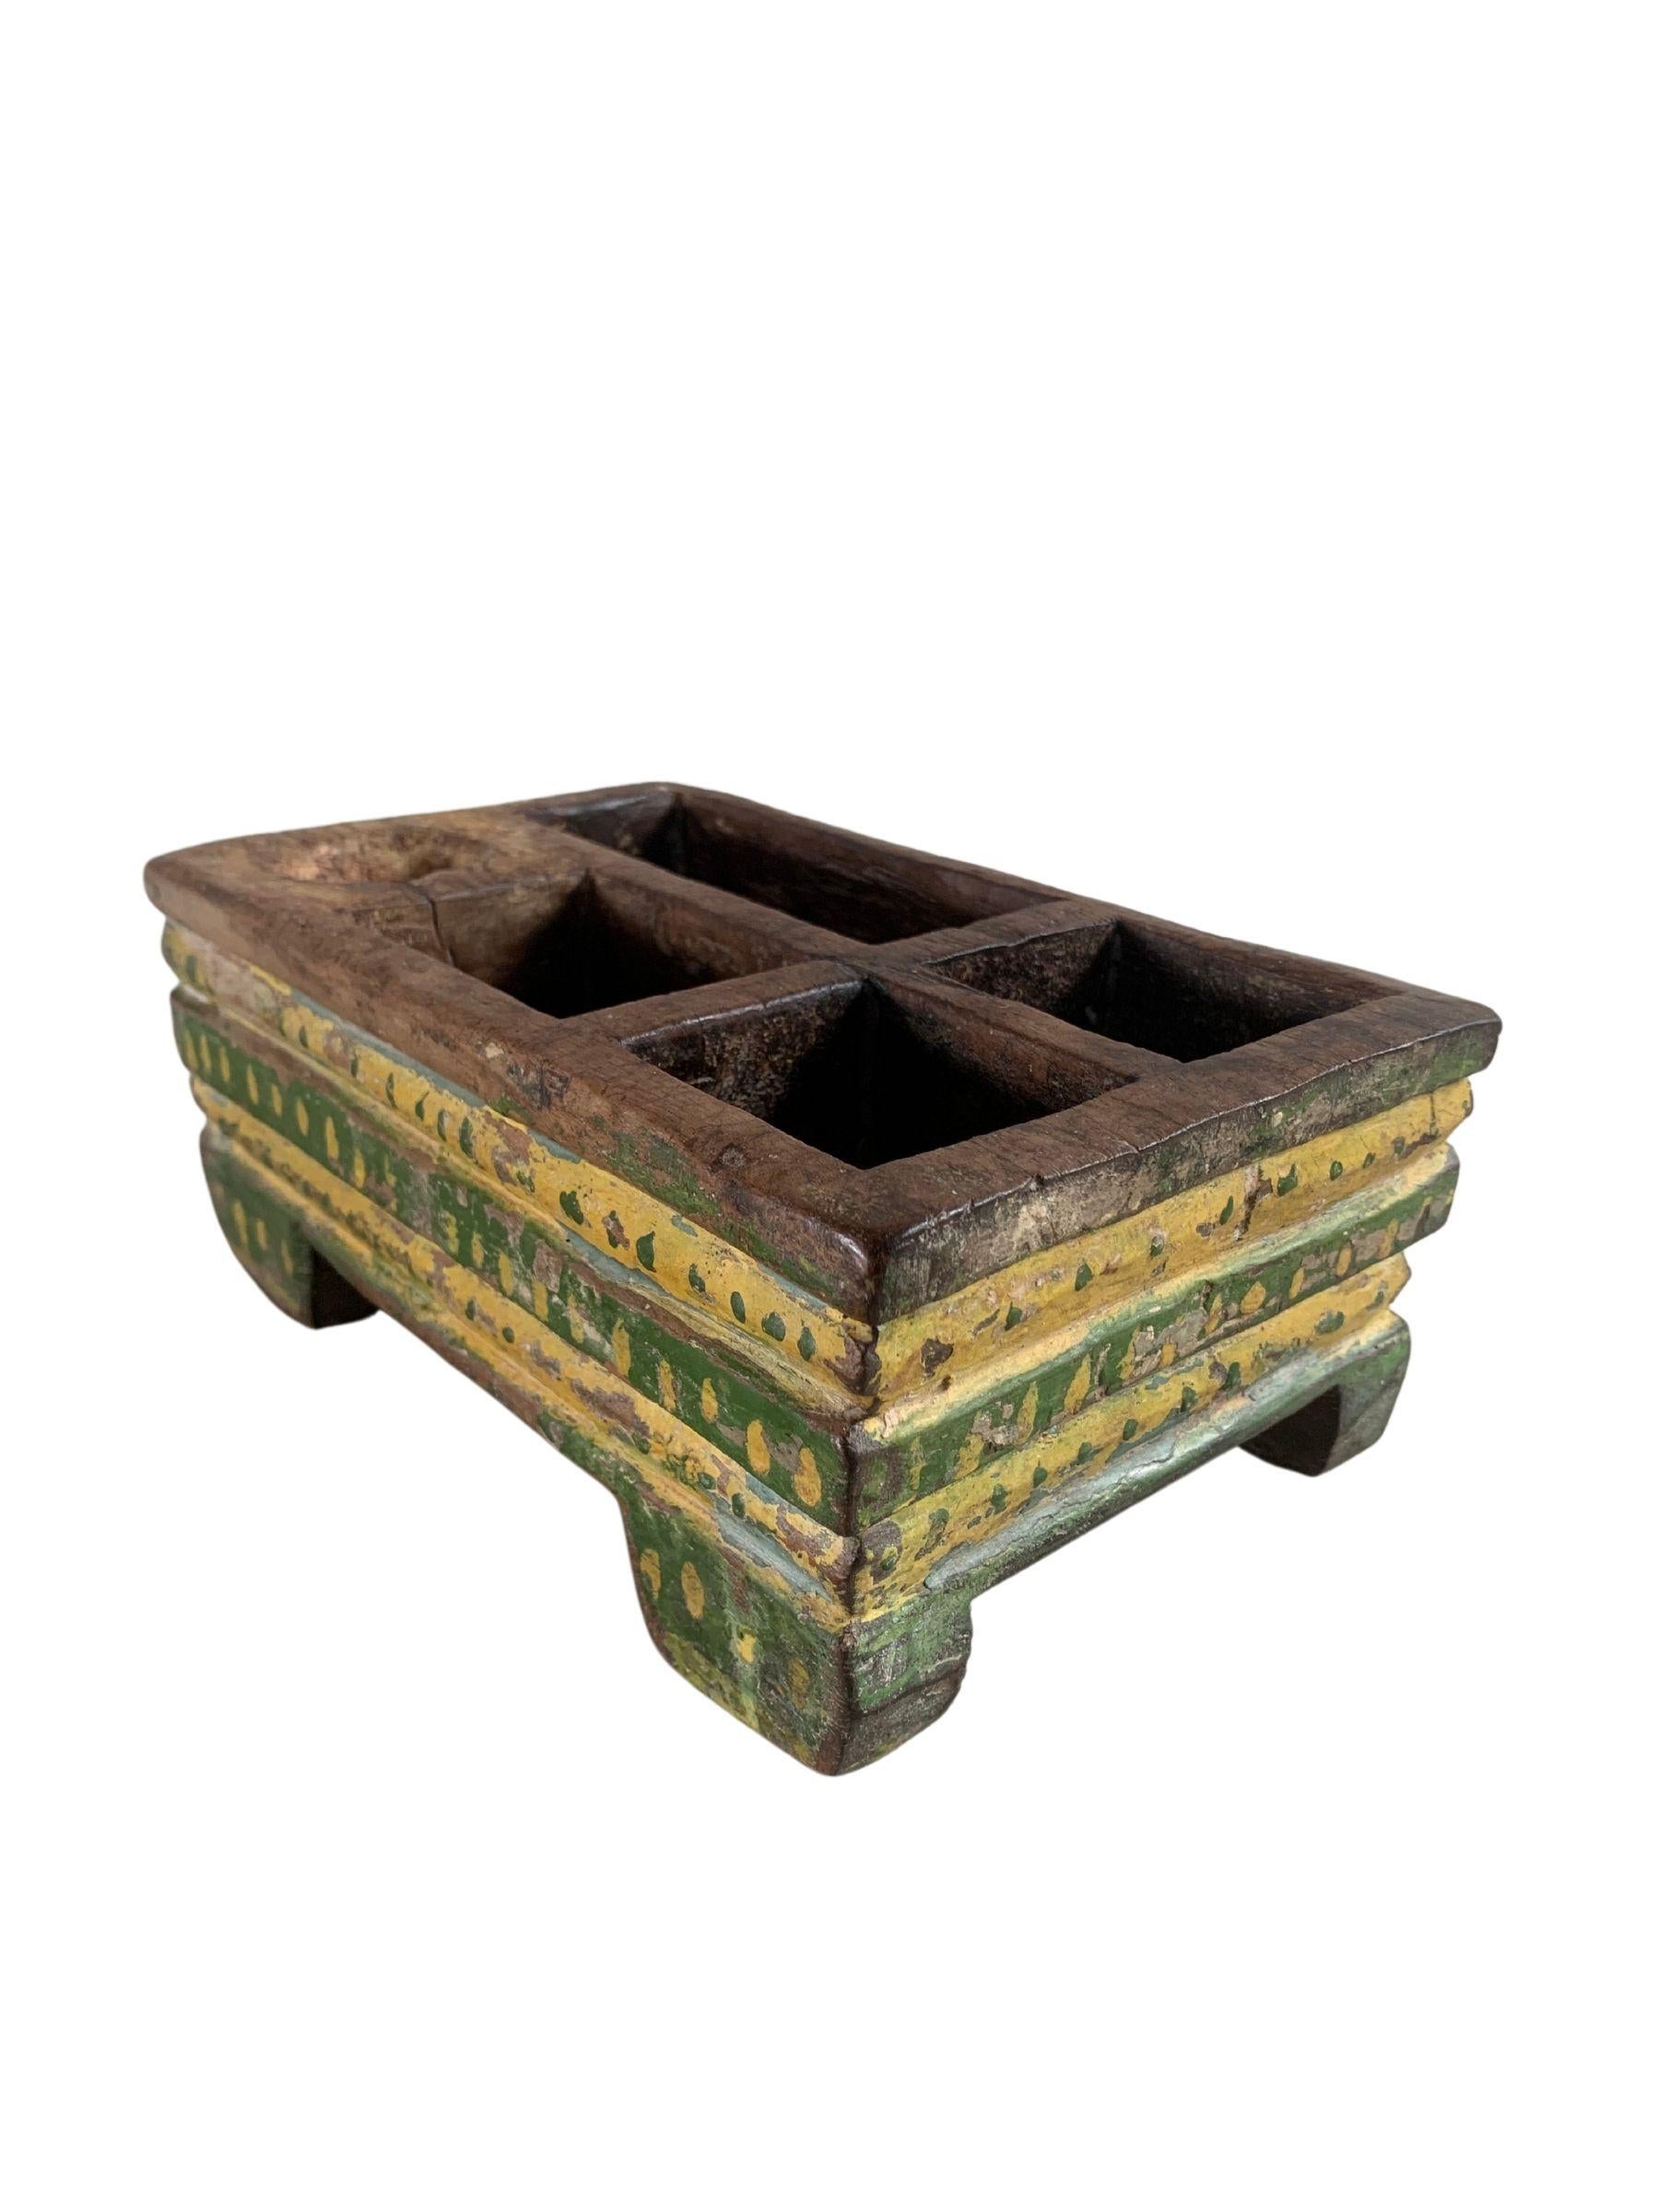 Tribal Betel Nut Box from Java with Polychromed Finish, Indonesia, c. 1900 For Sale